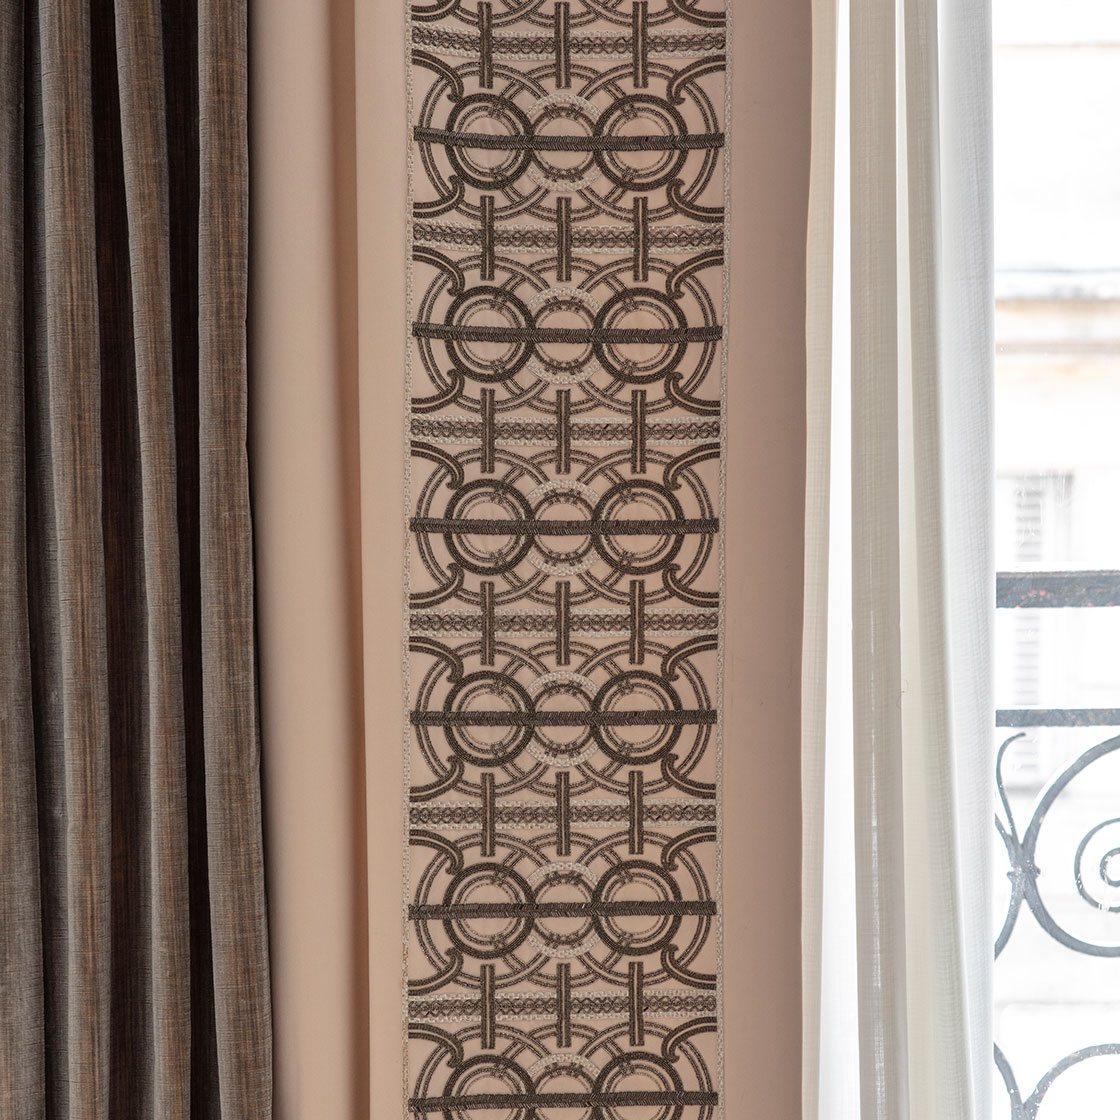 Circe embroidery on drapes in Eriskay wool - Storm - Beaumont & Fletcher